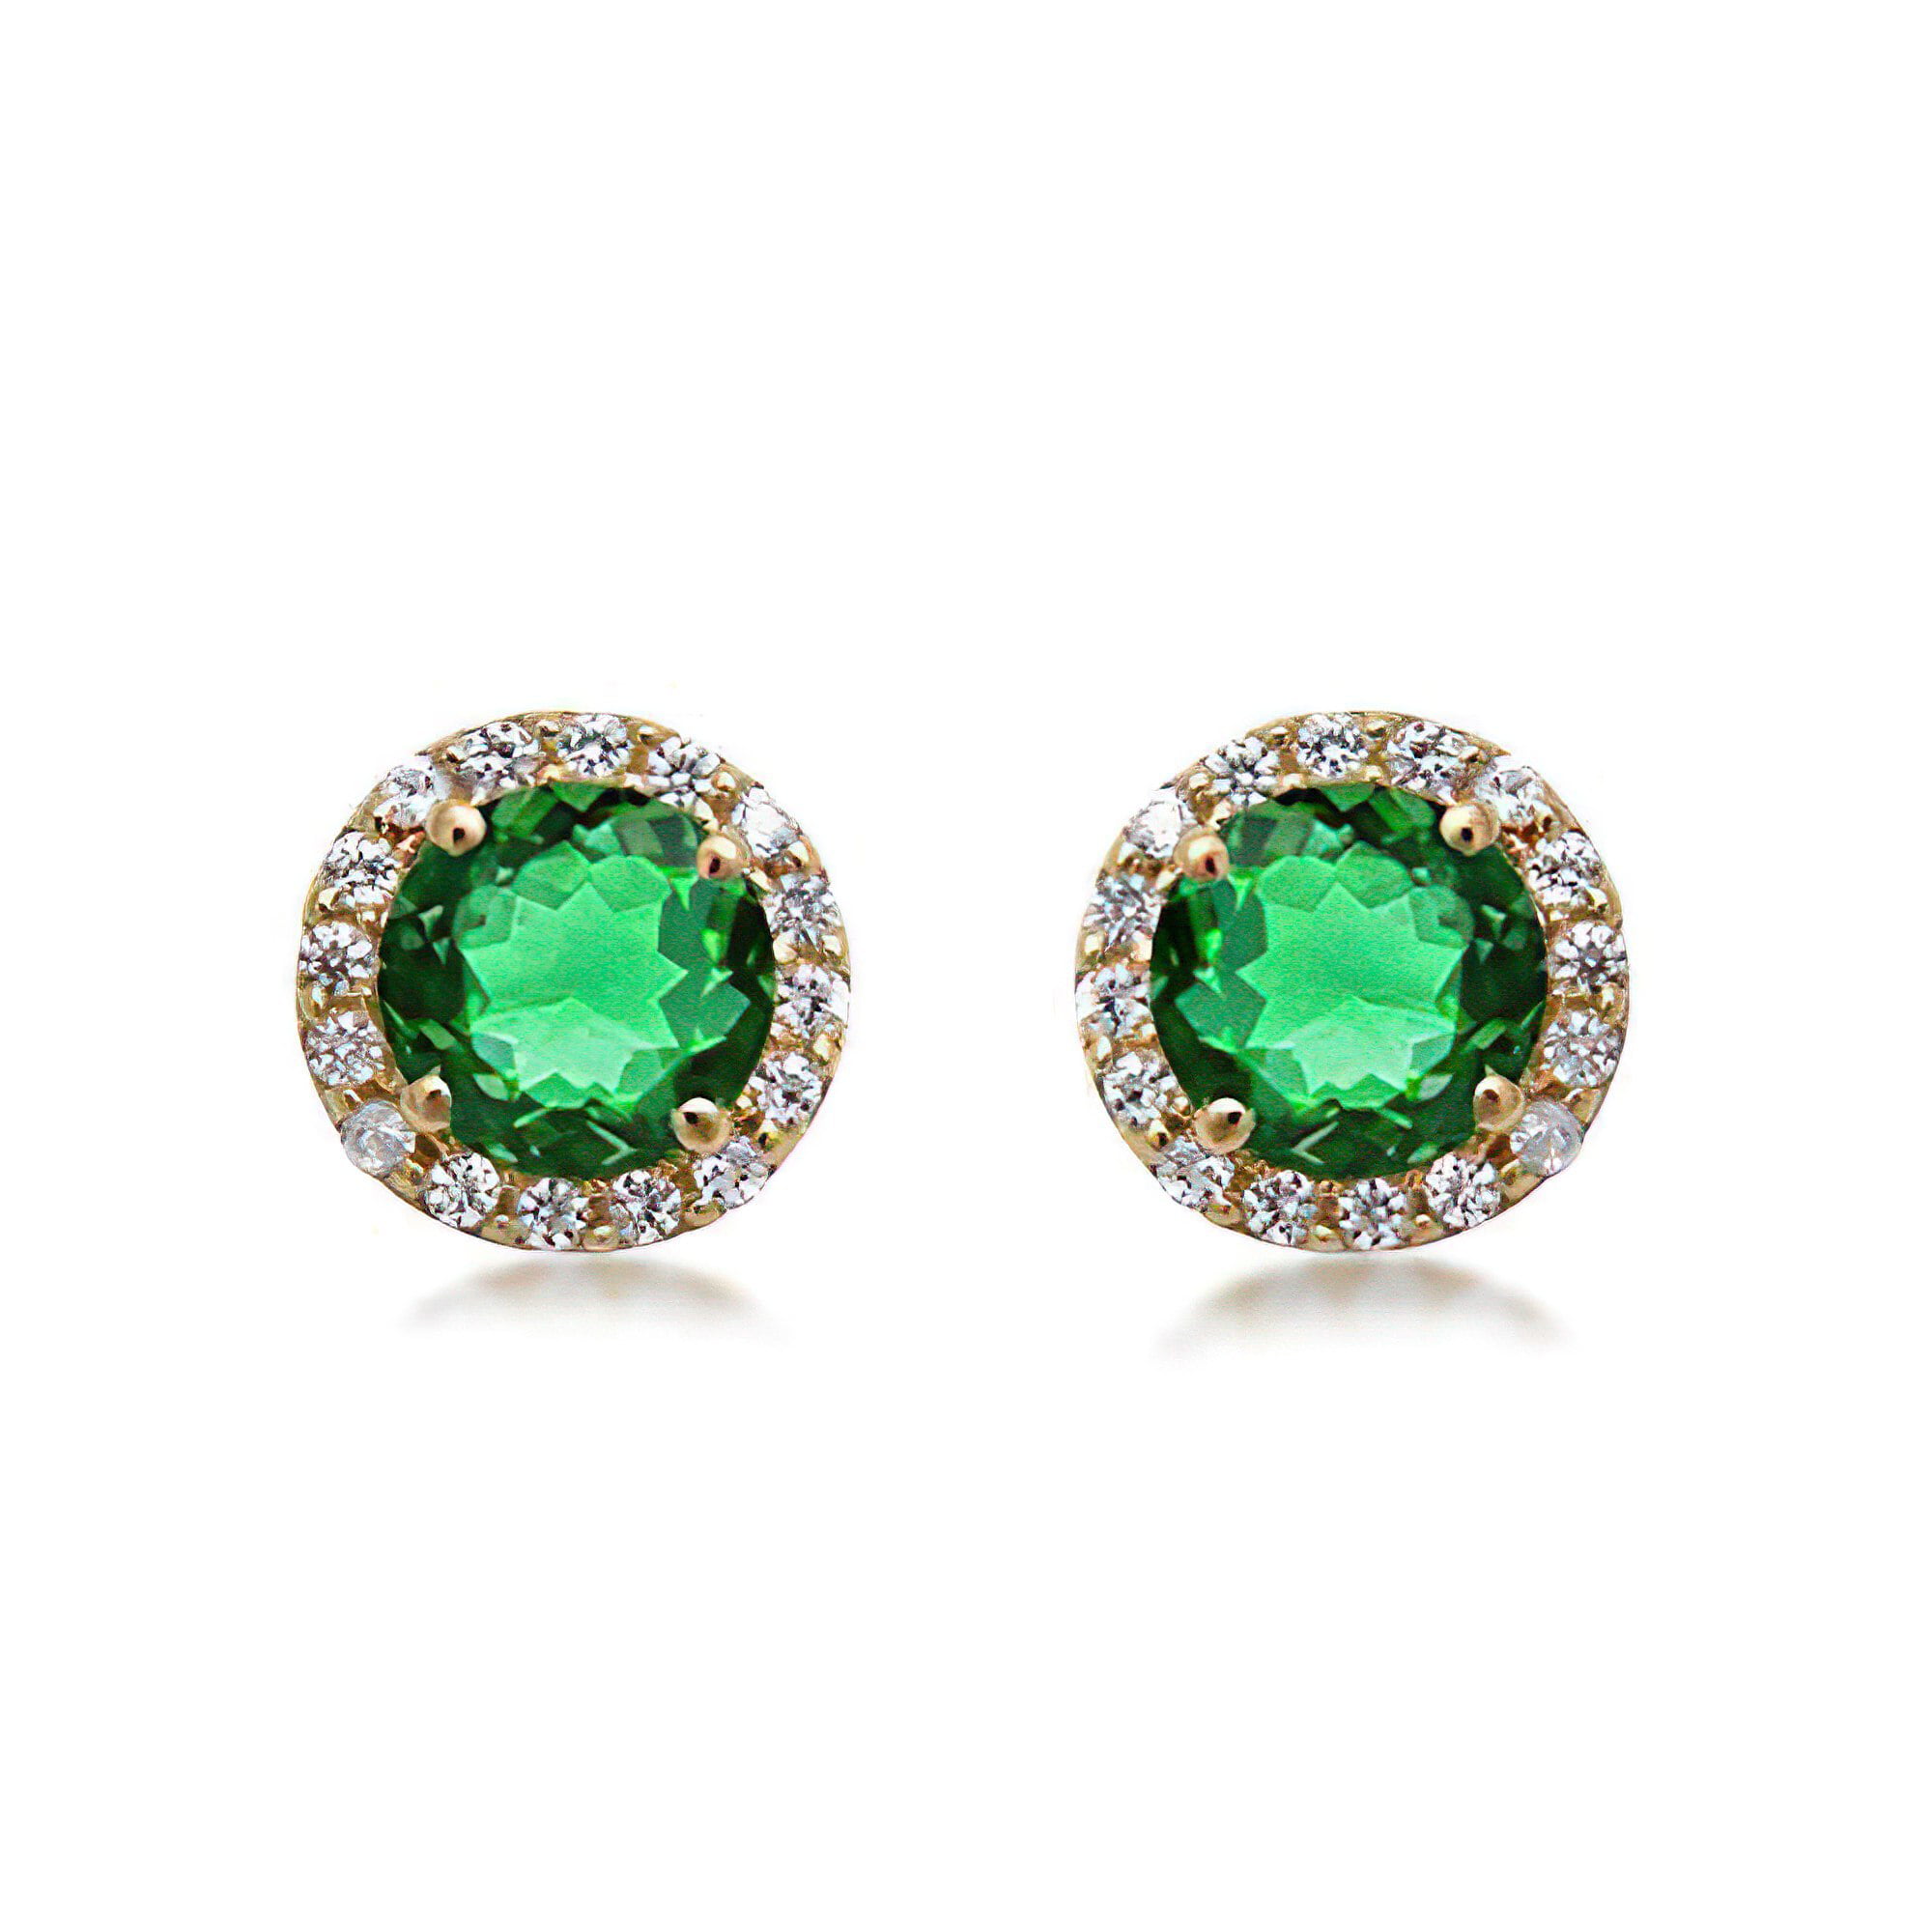 Small Emerald Earrings Solid 9 Carat Yellow Gold Studs 3mm Smooth Rub Over Set 